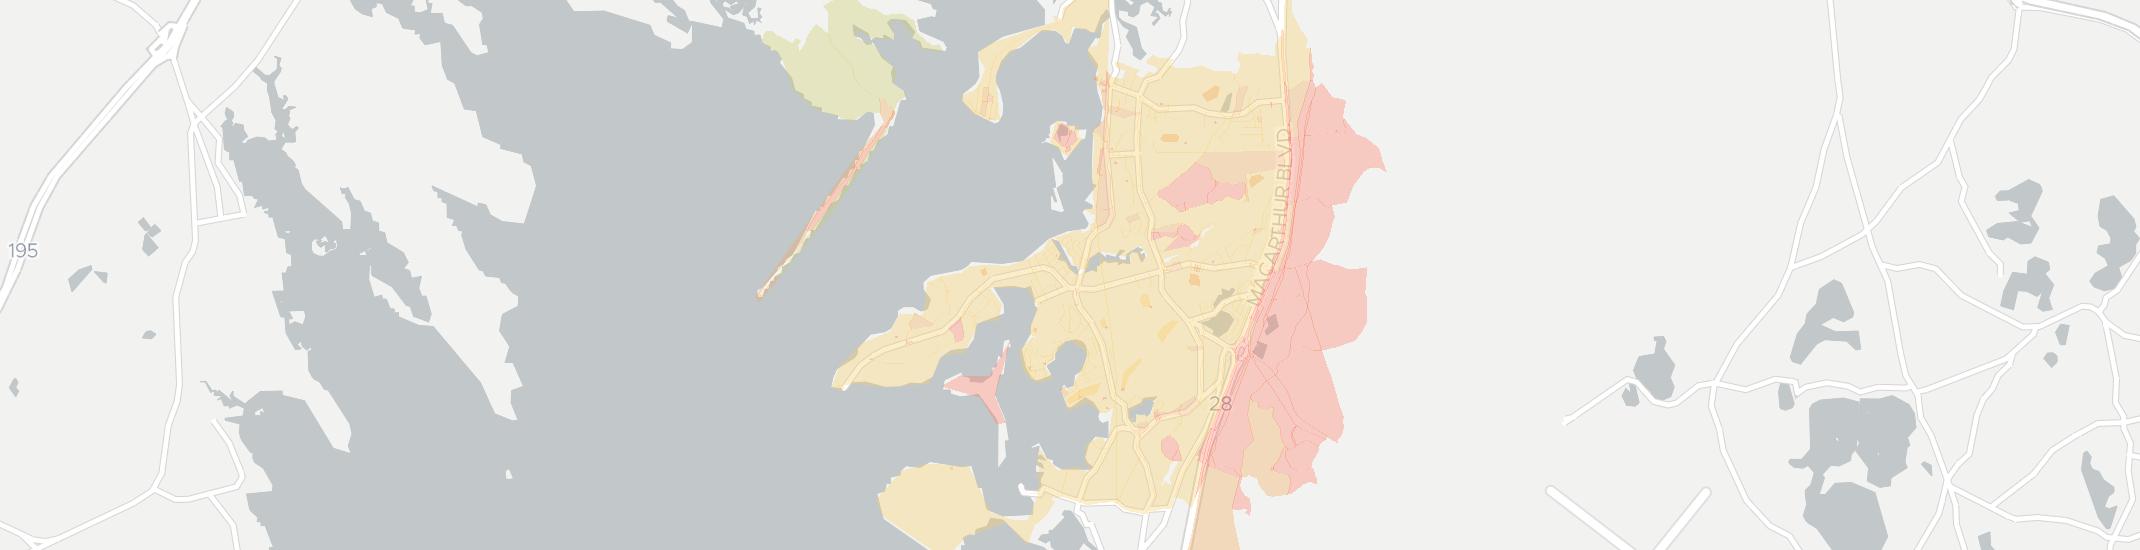 Pocasset Internet Competition Map. Click for interactive map.